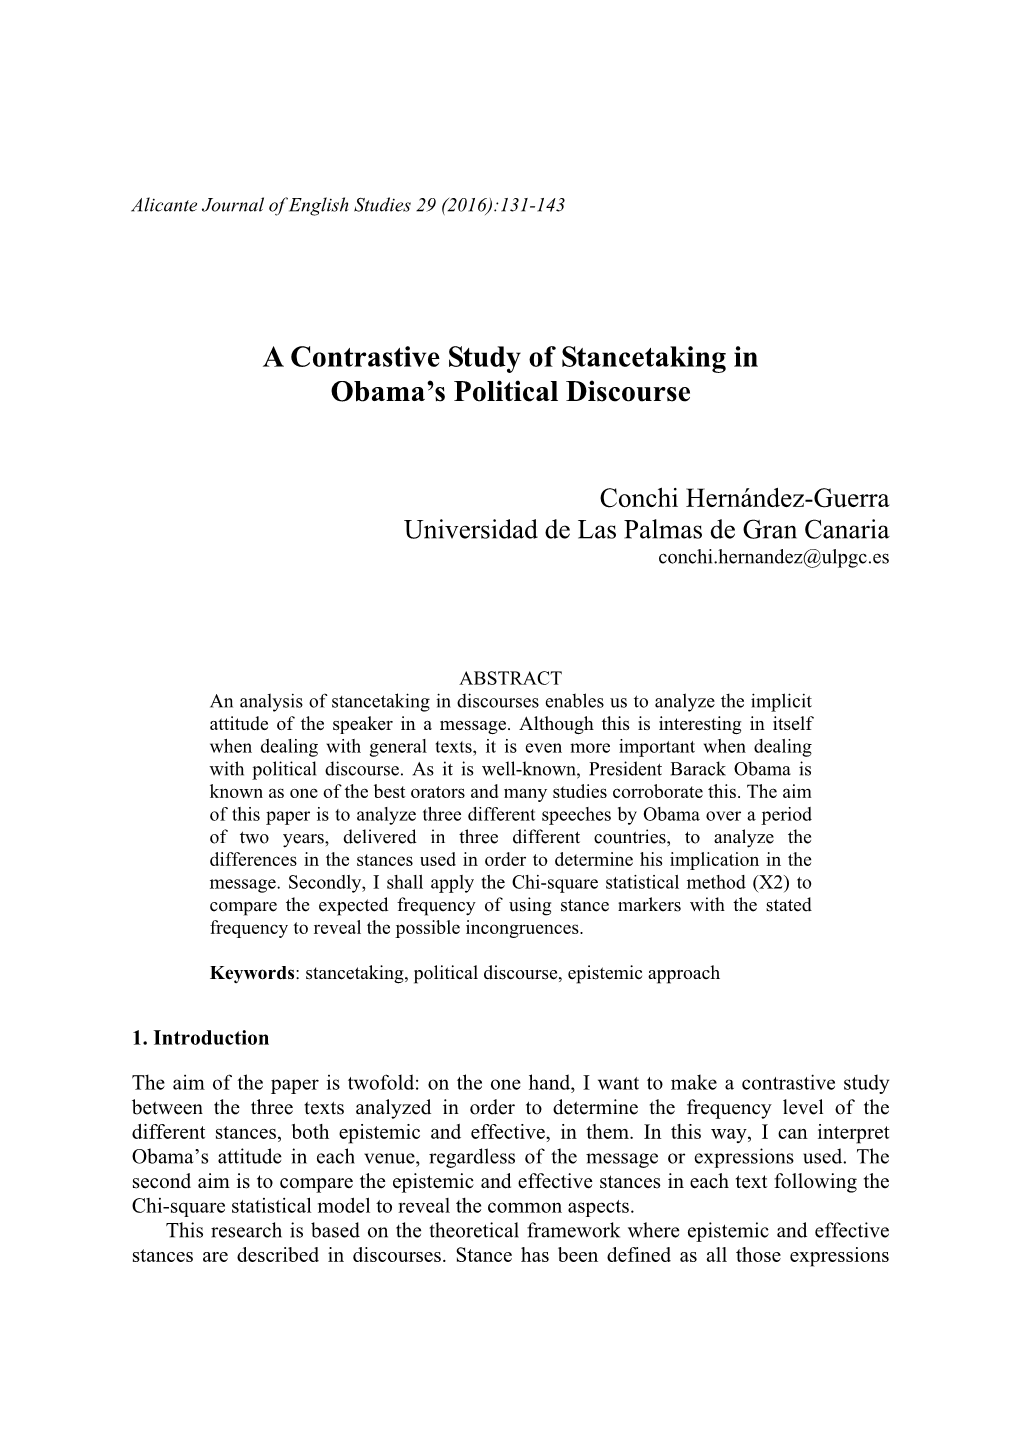 A Contrastive Study of Stancetaking in Obama's Political Discourse